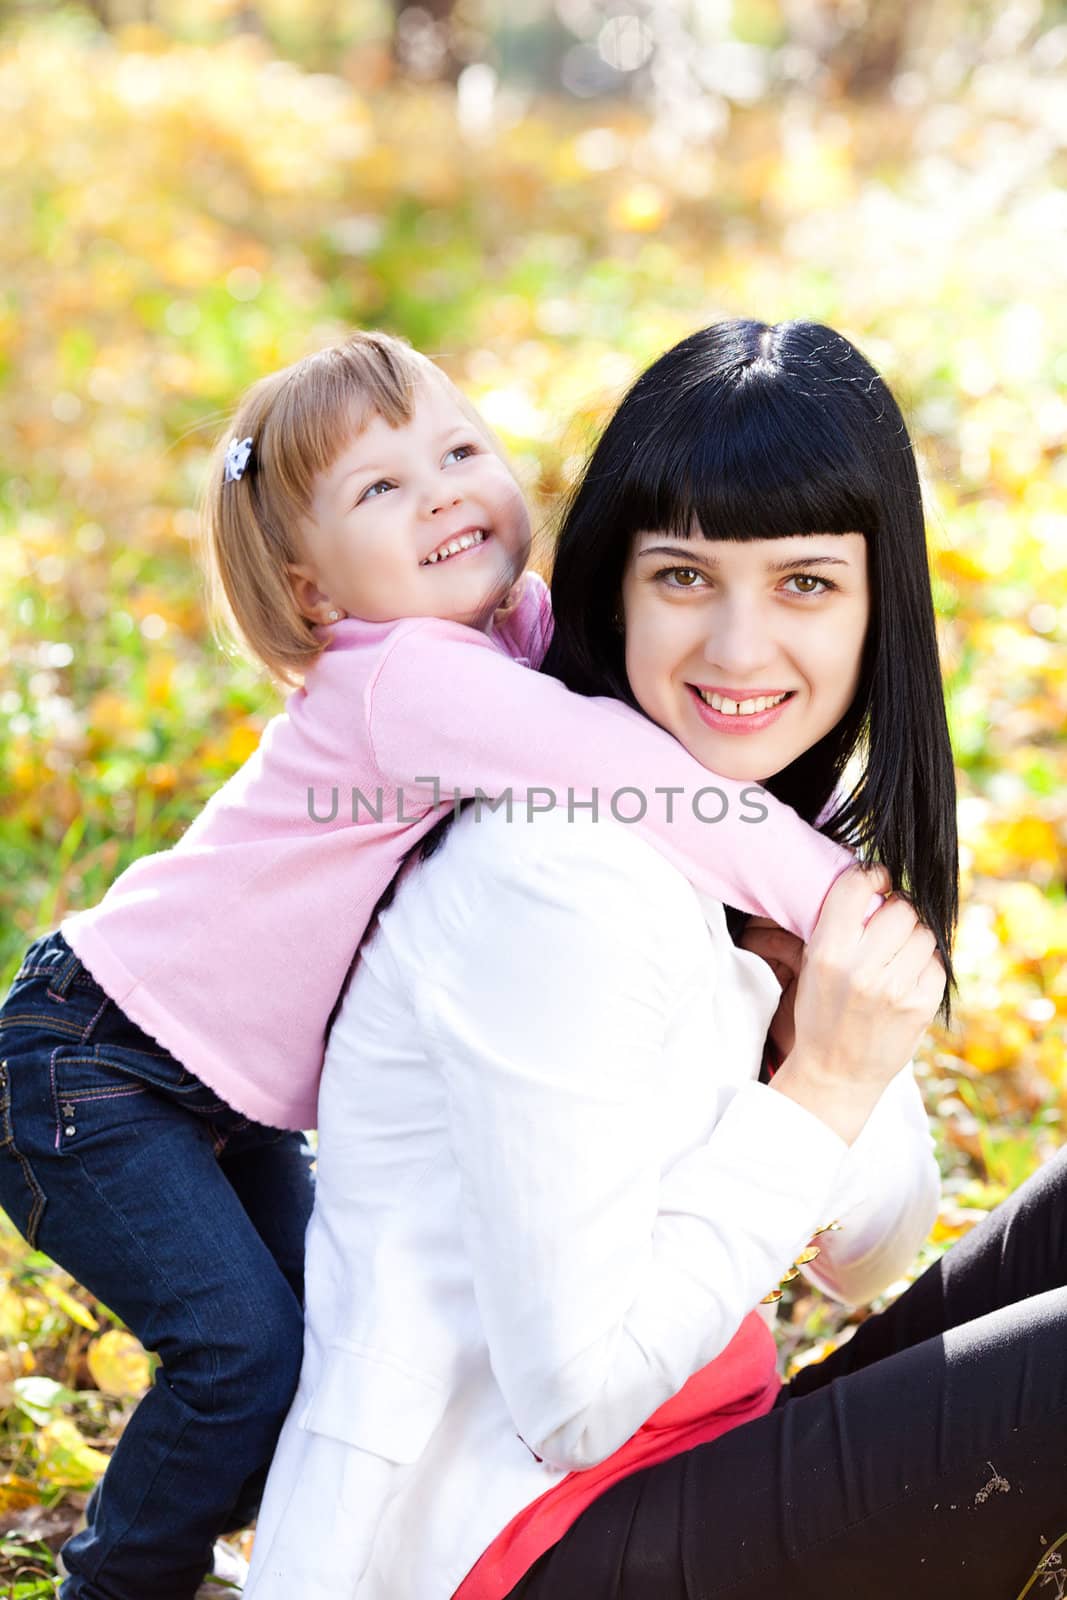 beautiful young mother and her daughter on the autumv forest